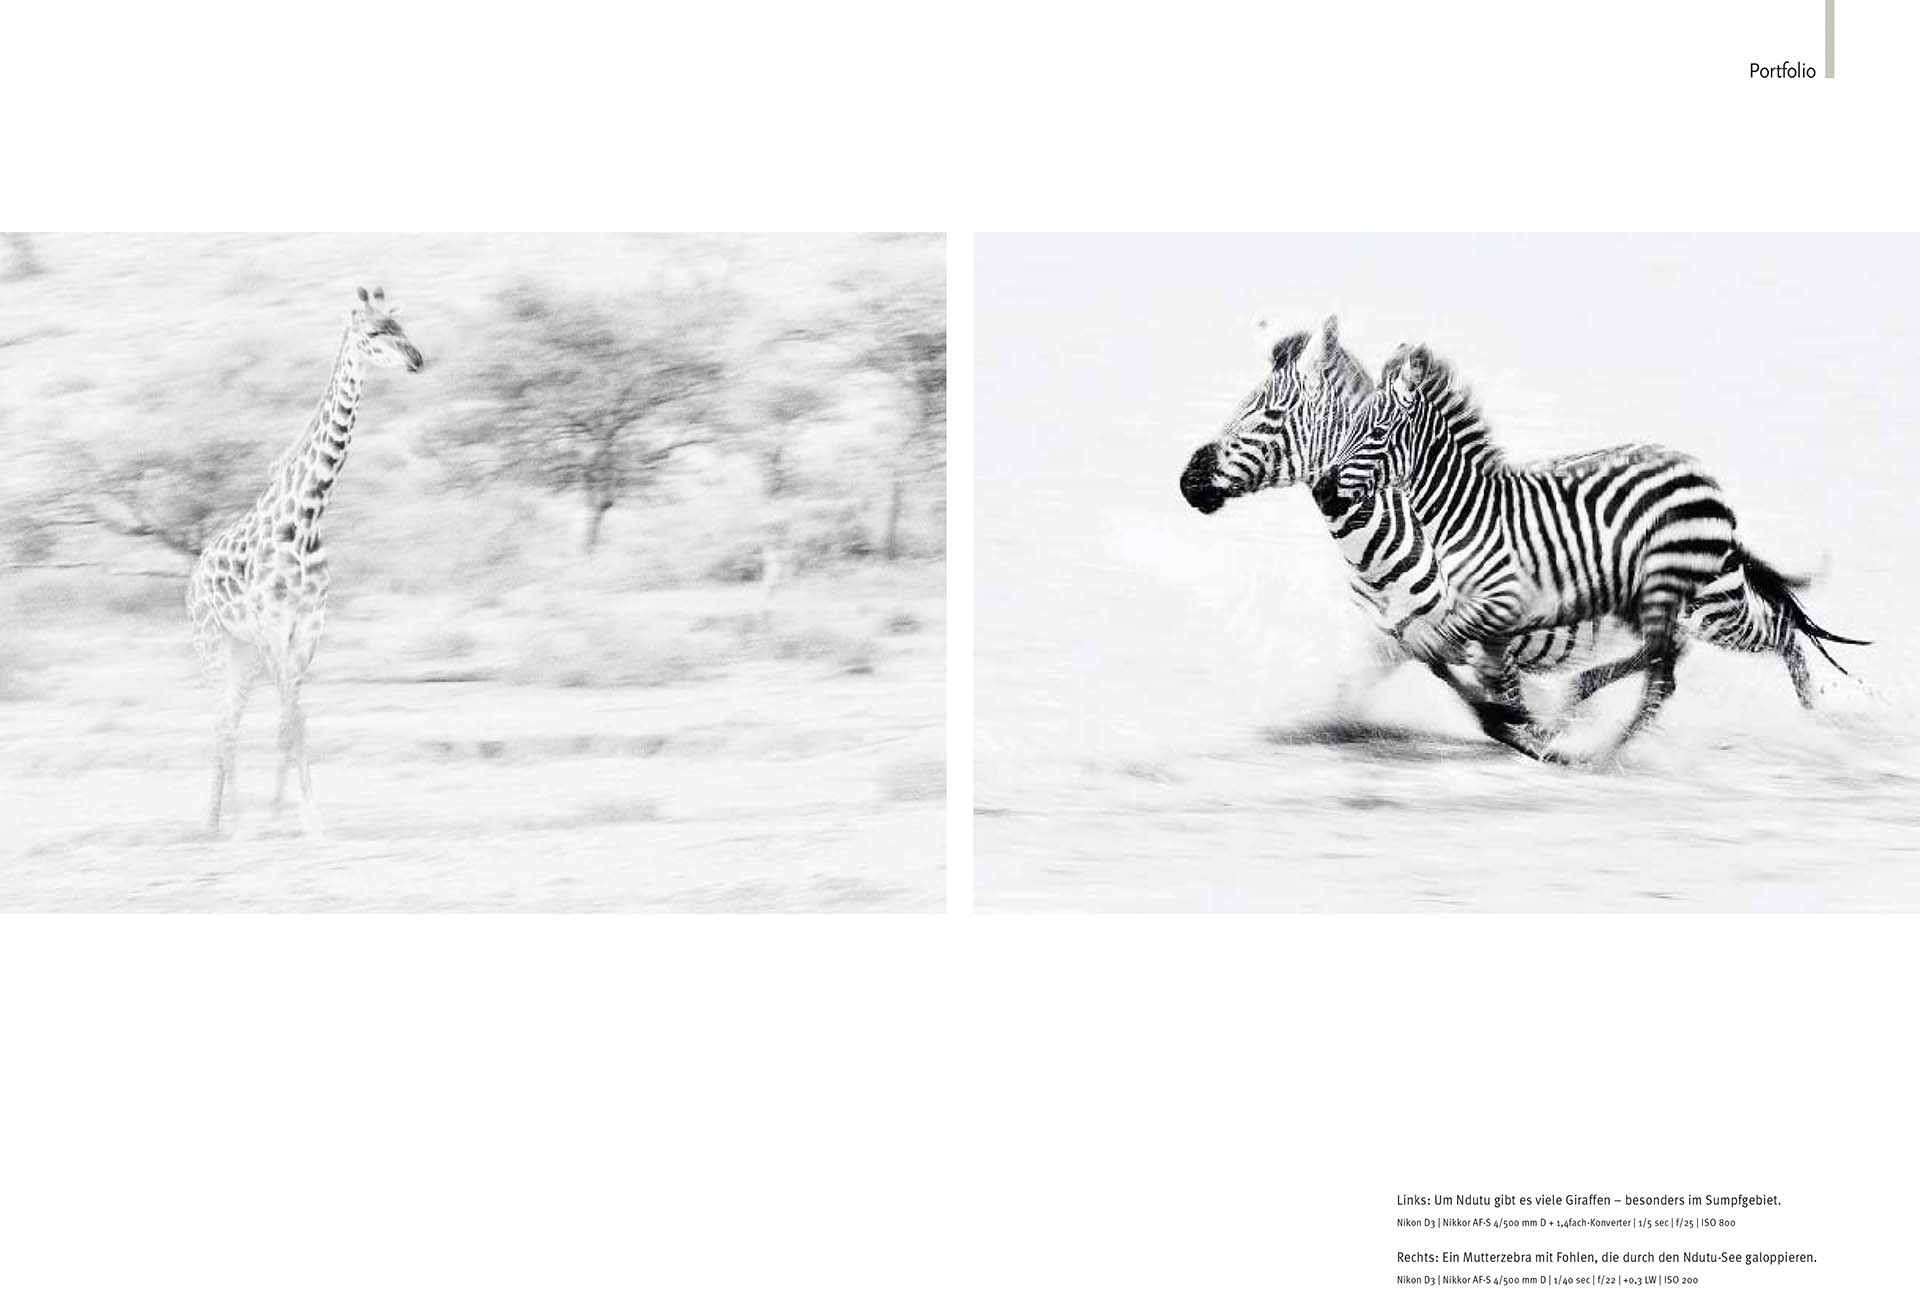 Ten pages of article about wildlife of Ndutu in the German magazine NaturFoto.